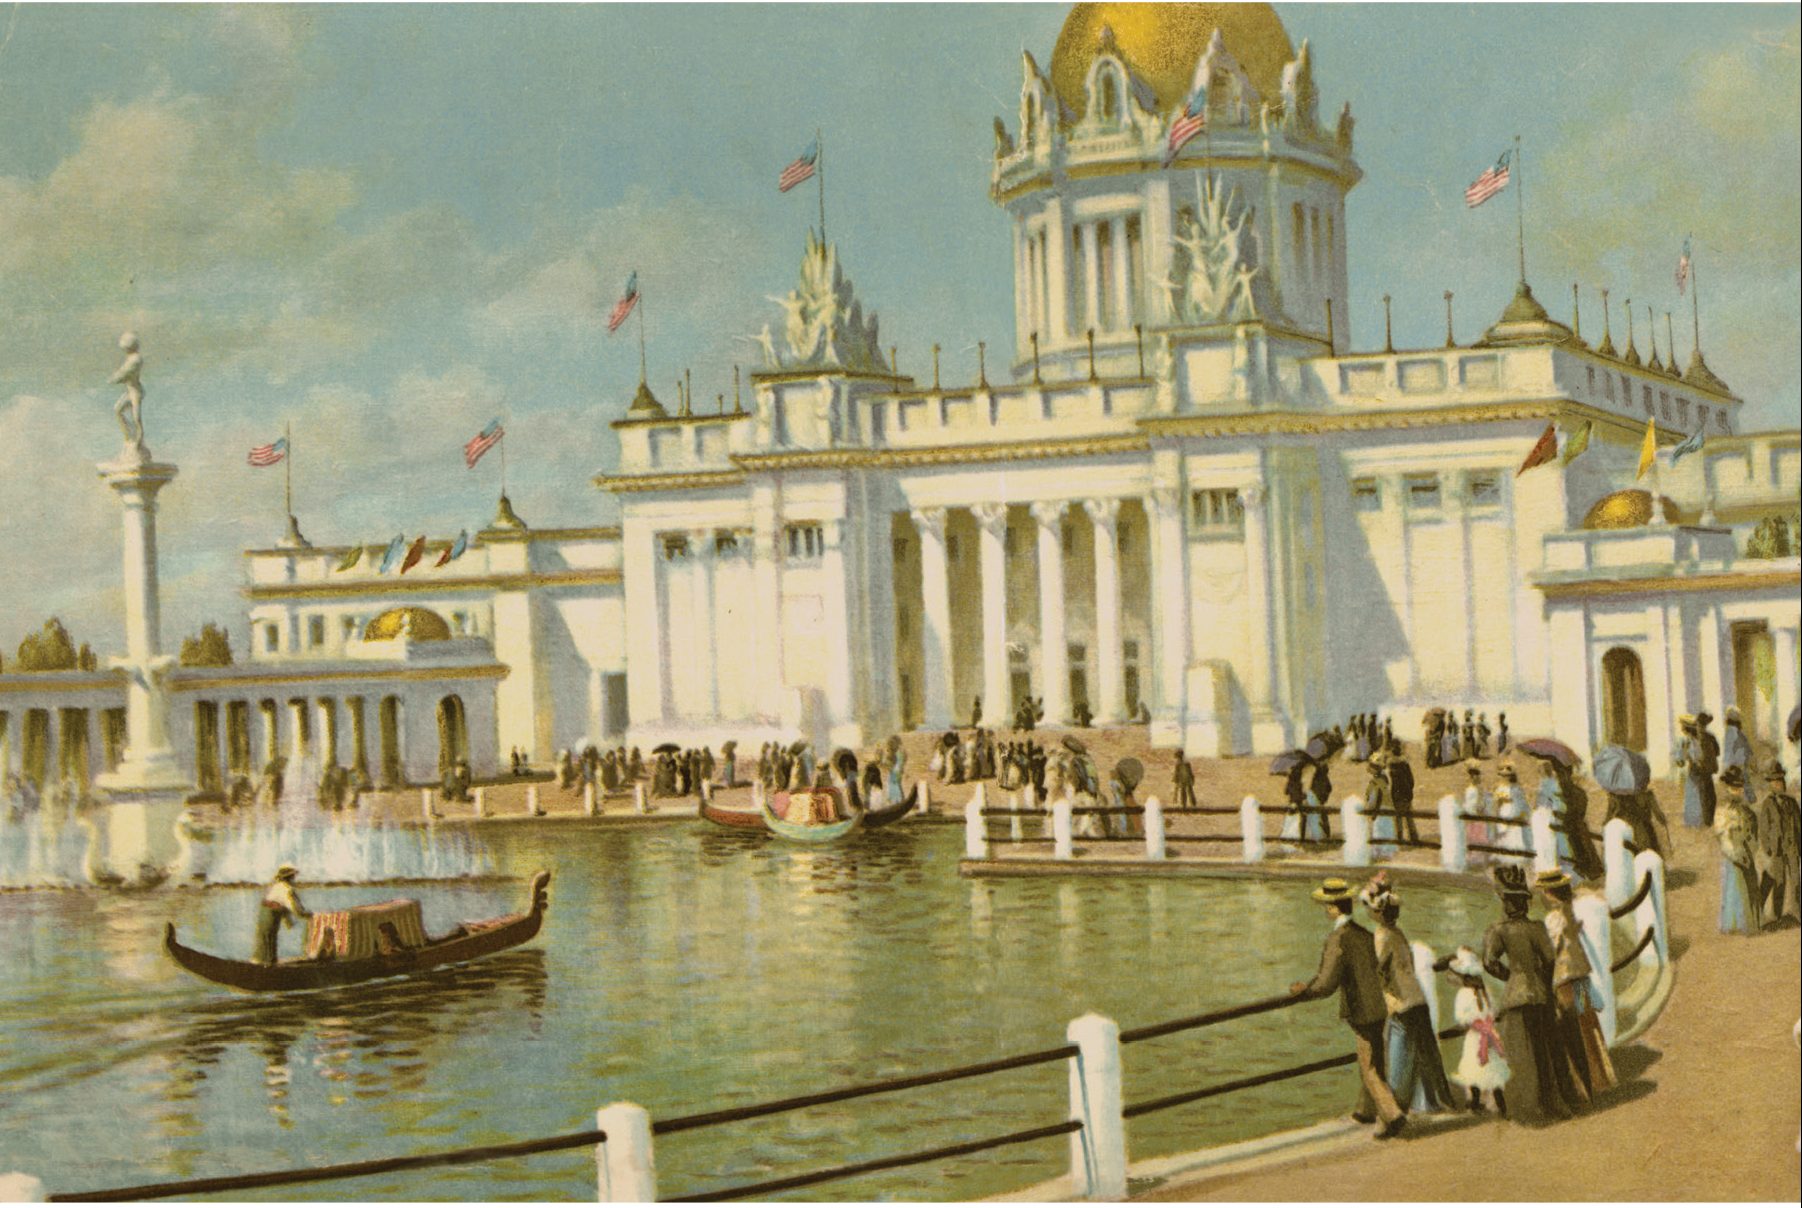 Book cover for "The Trans-Mississippi and international Expositions of 1898" featuring an image of a white building with a gold dome situated along a river